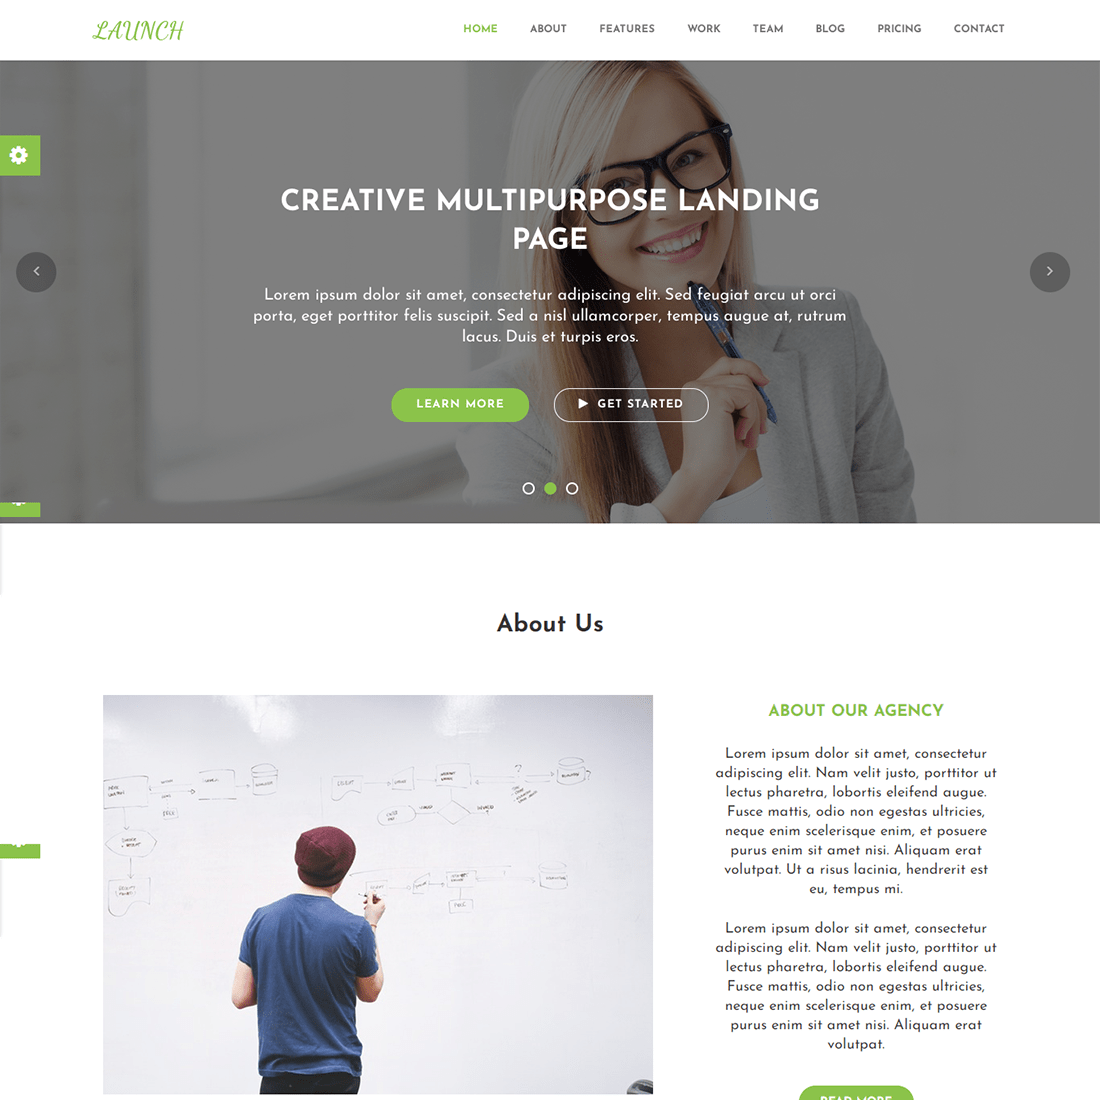 Marketing Digital Agency Website Template preview image.